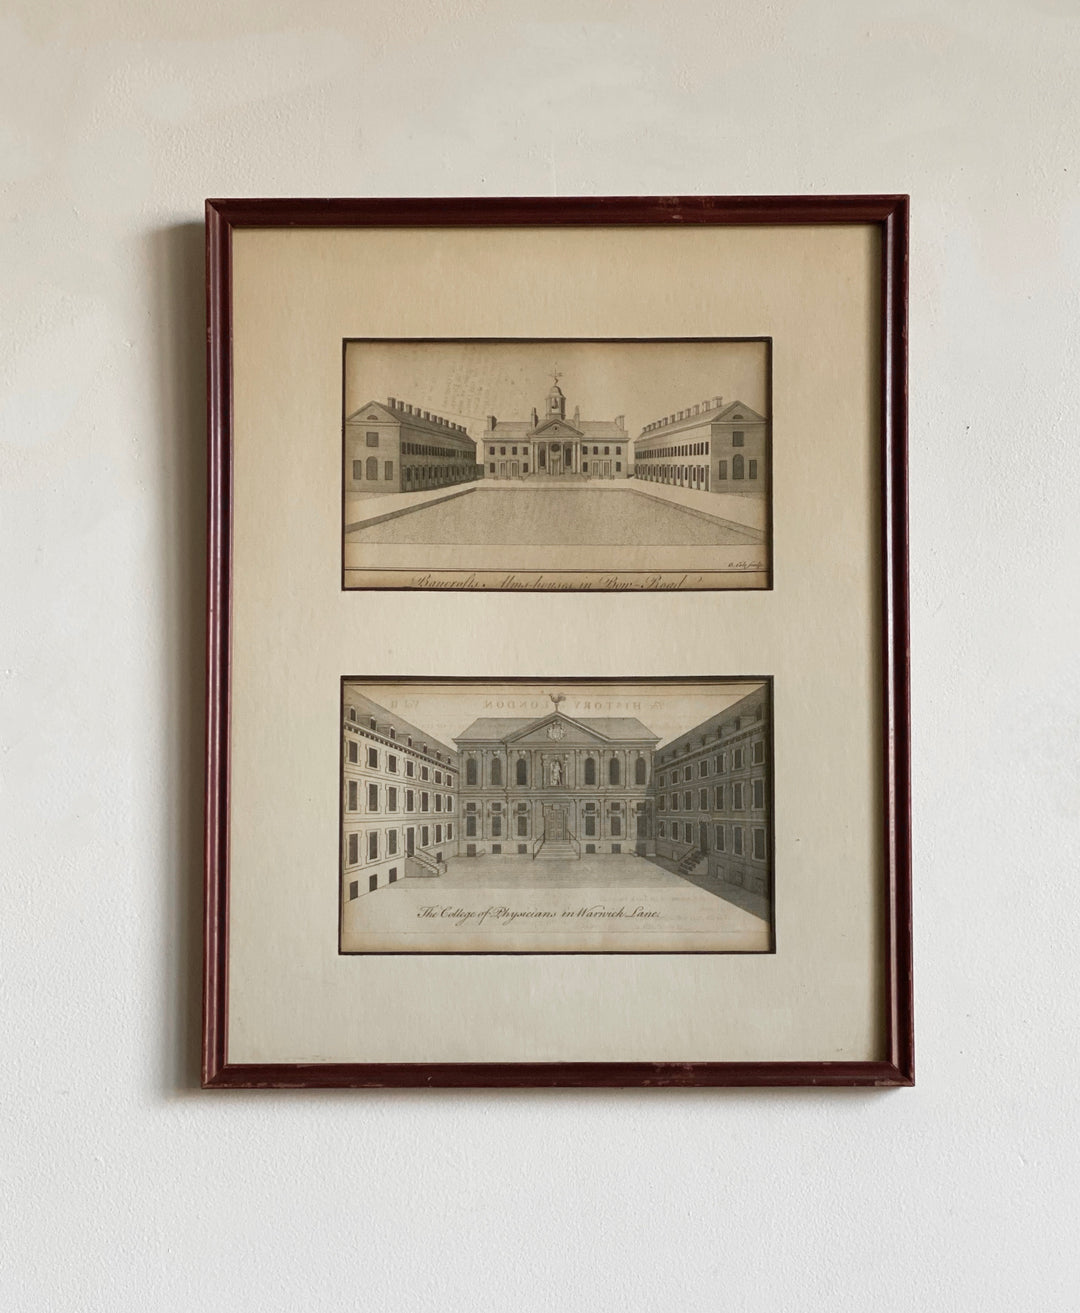 antique engravings, ”bancroft” and “college of physicians"